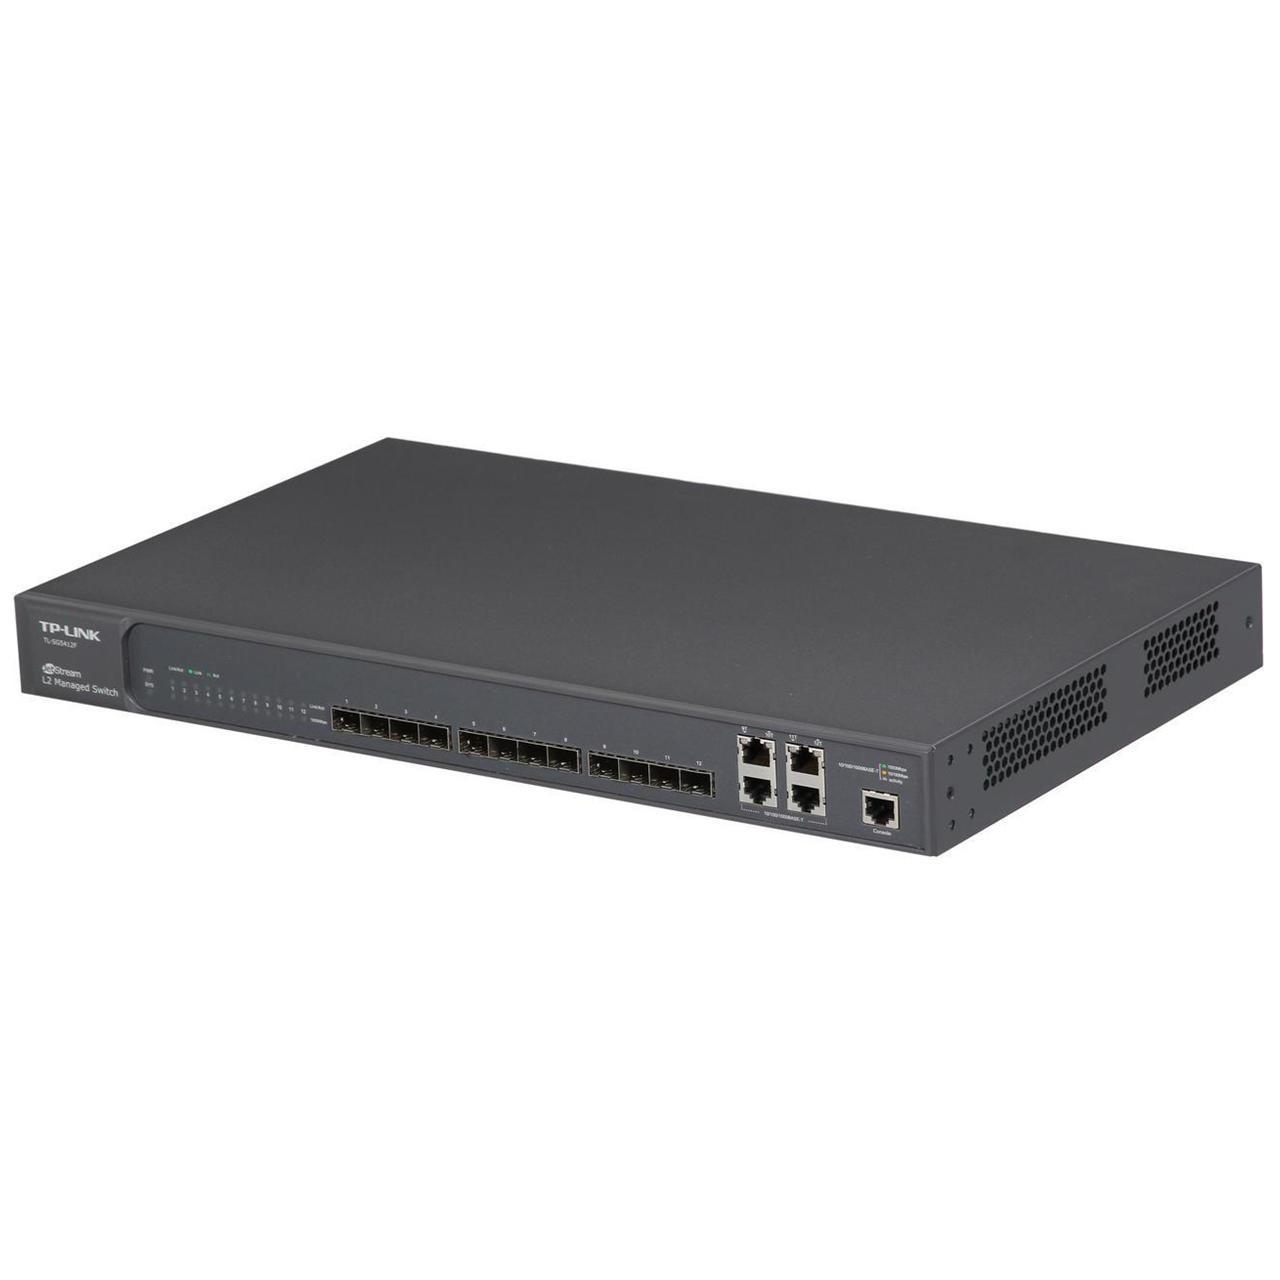 339e3 TP Link TL SG5412F Network Routers Switcher TP Link TL SG5412F JetStream 12 Port Gigabit SFP L2 Managed Switch with 4 Combo 1000BASE T Ports